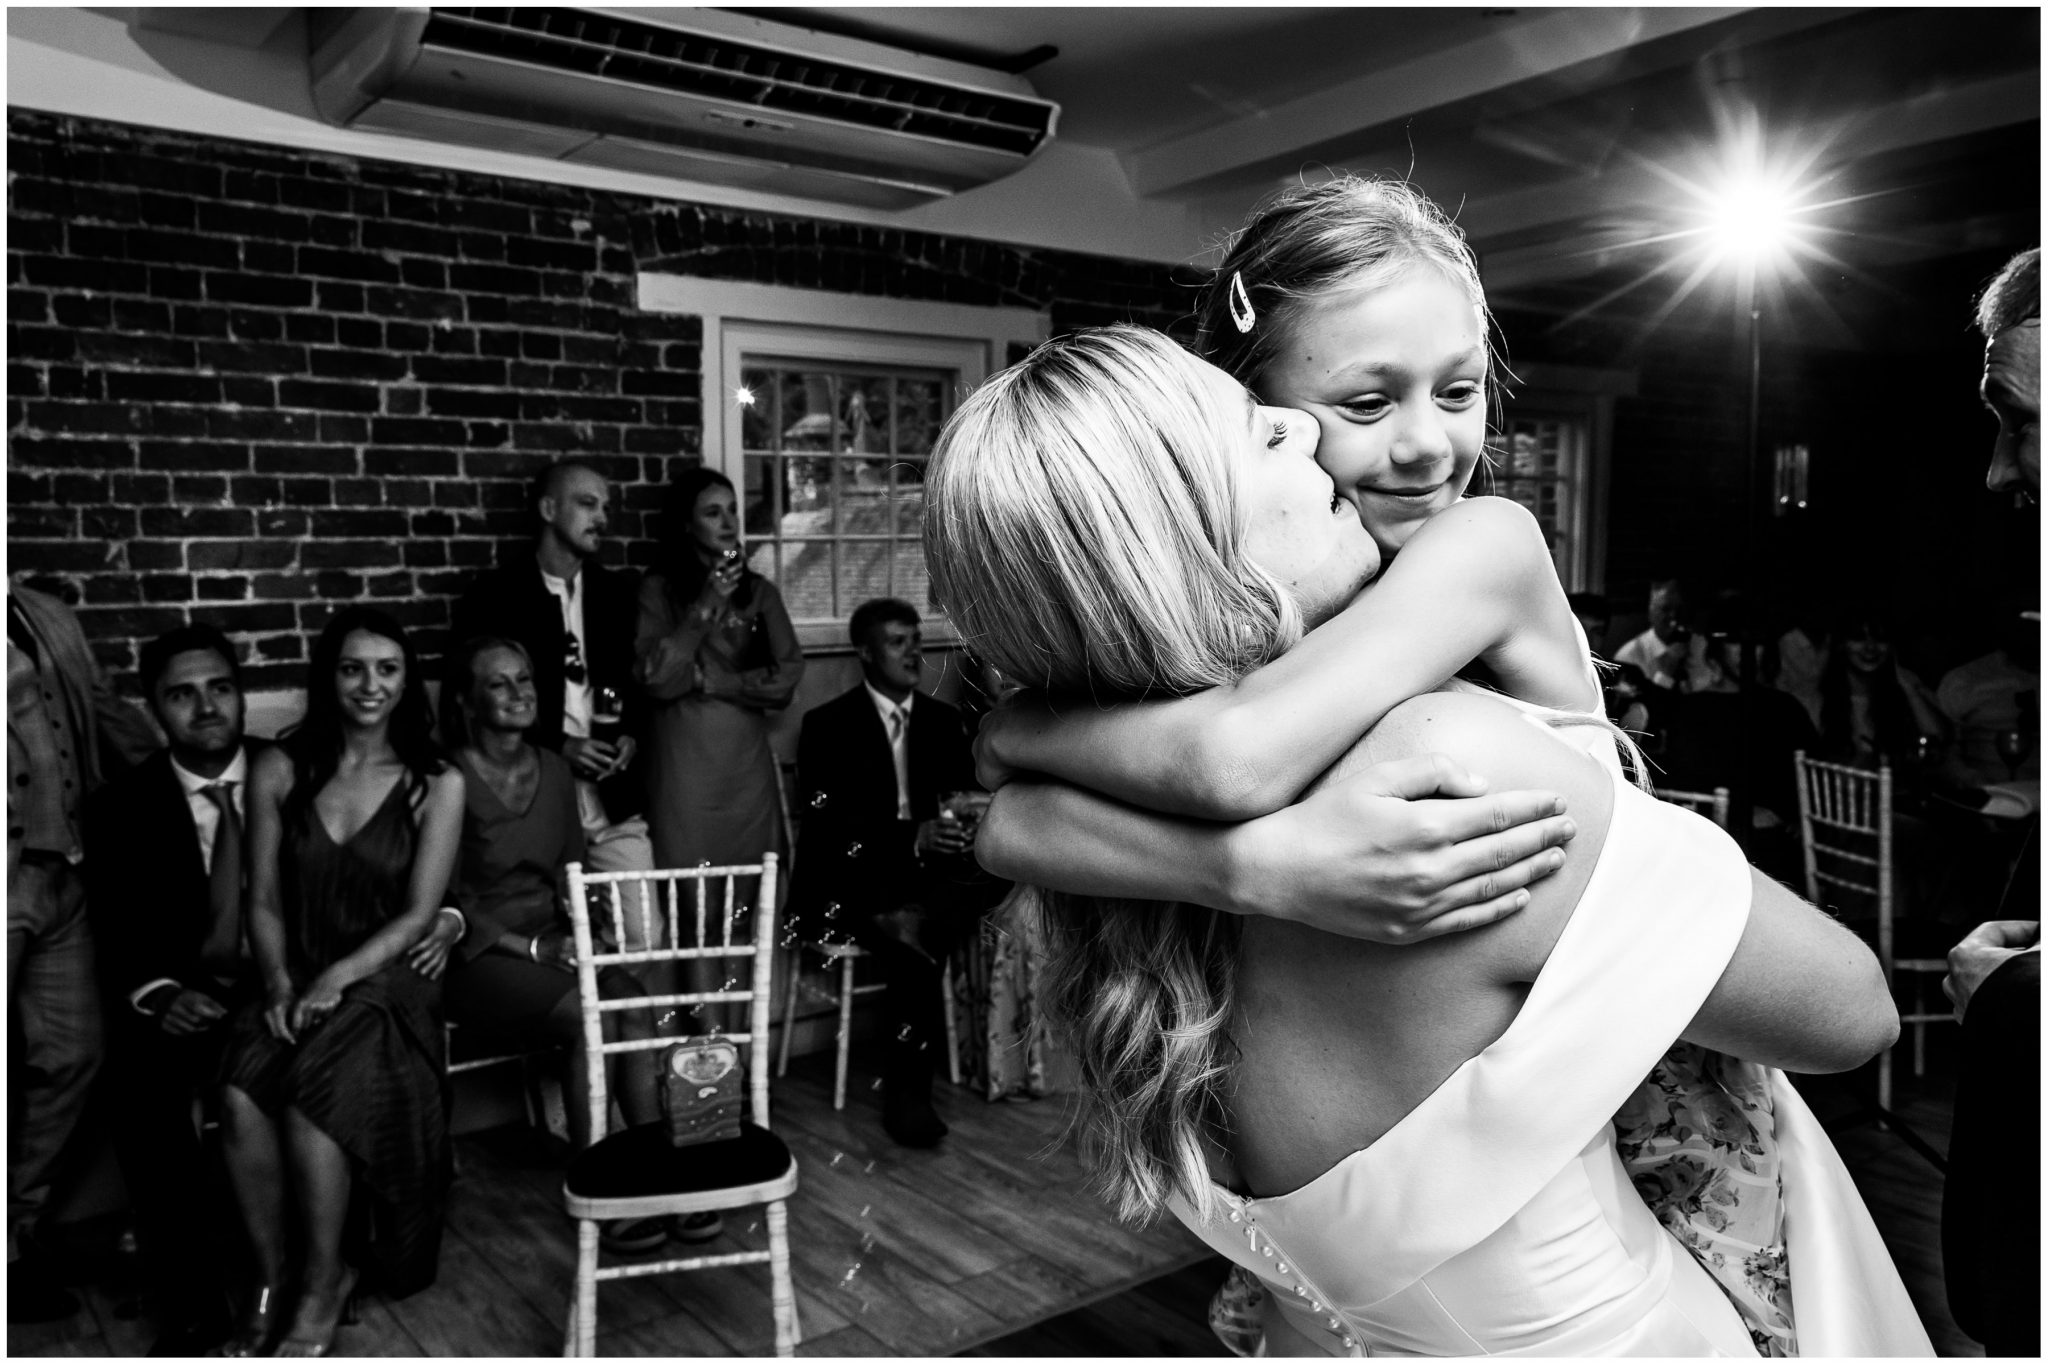 The bride on the dancefloor with a young guest